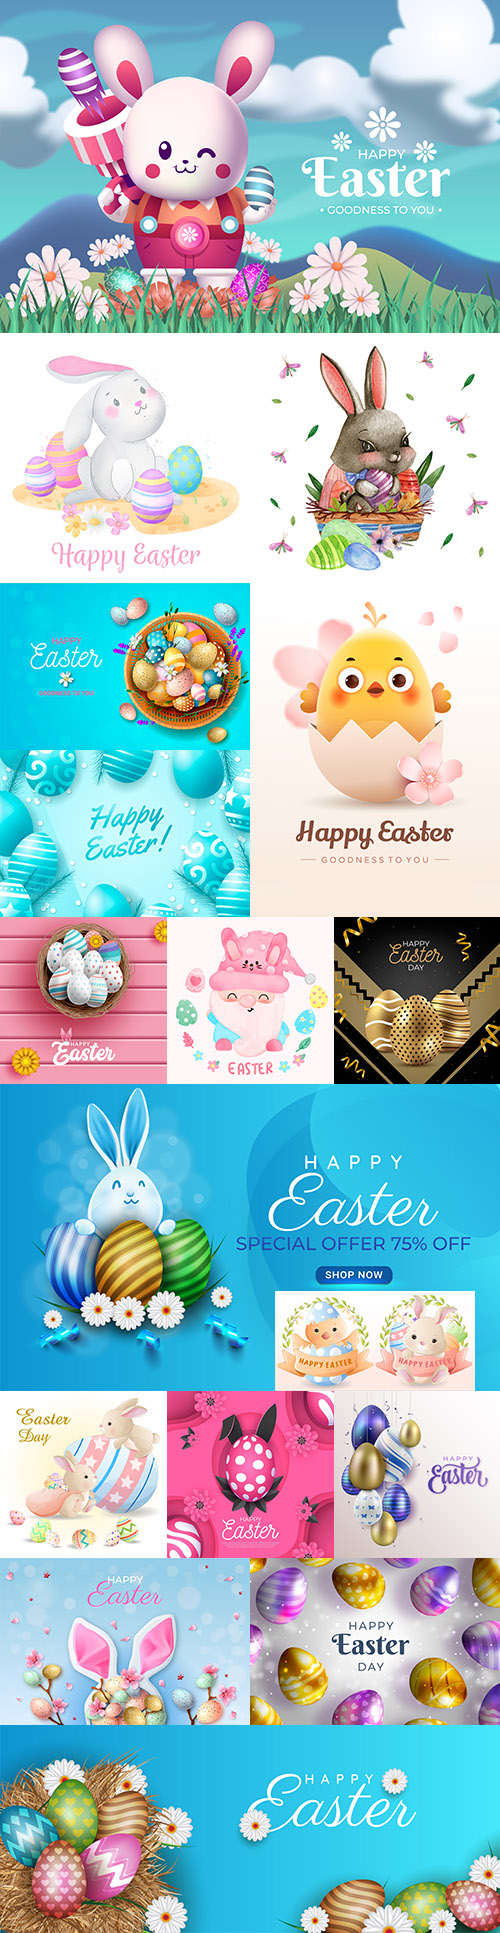 Happy Easter background and design banner with colorful eggs